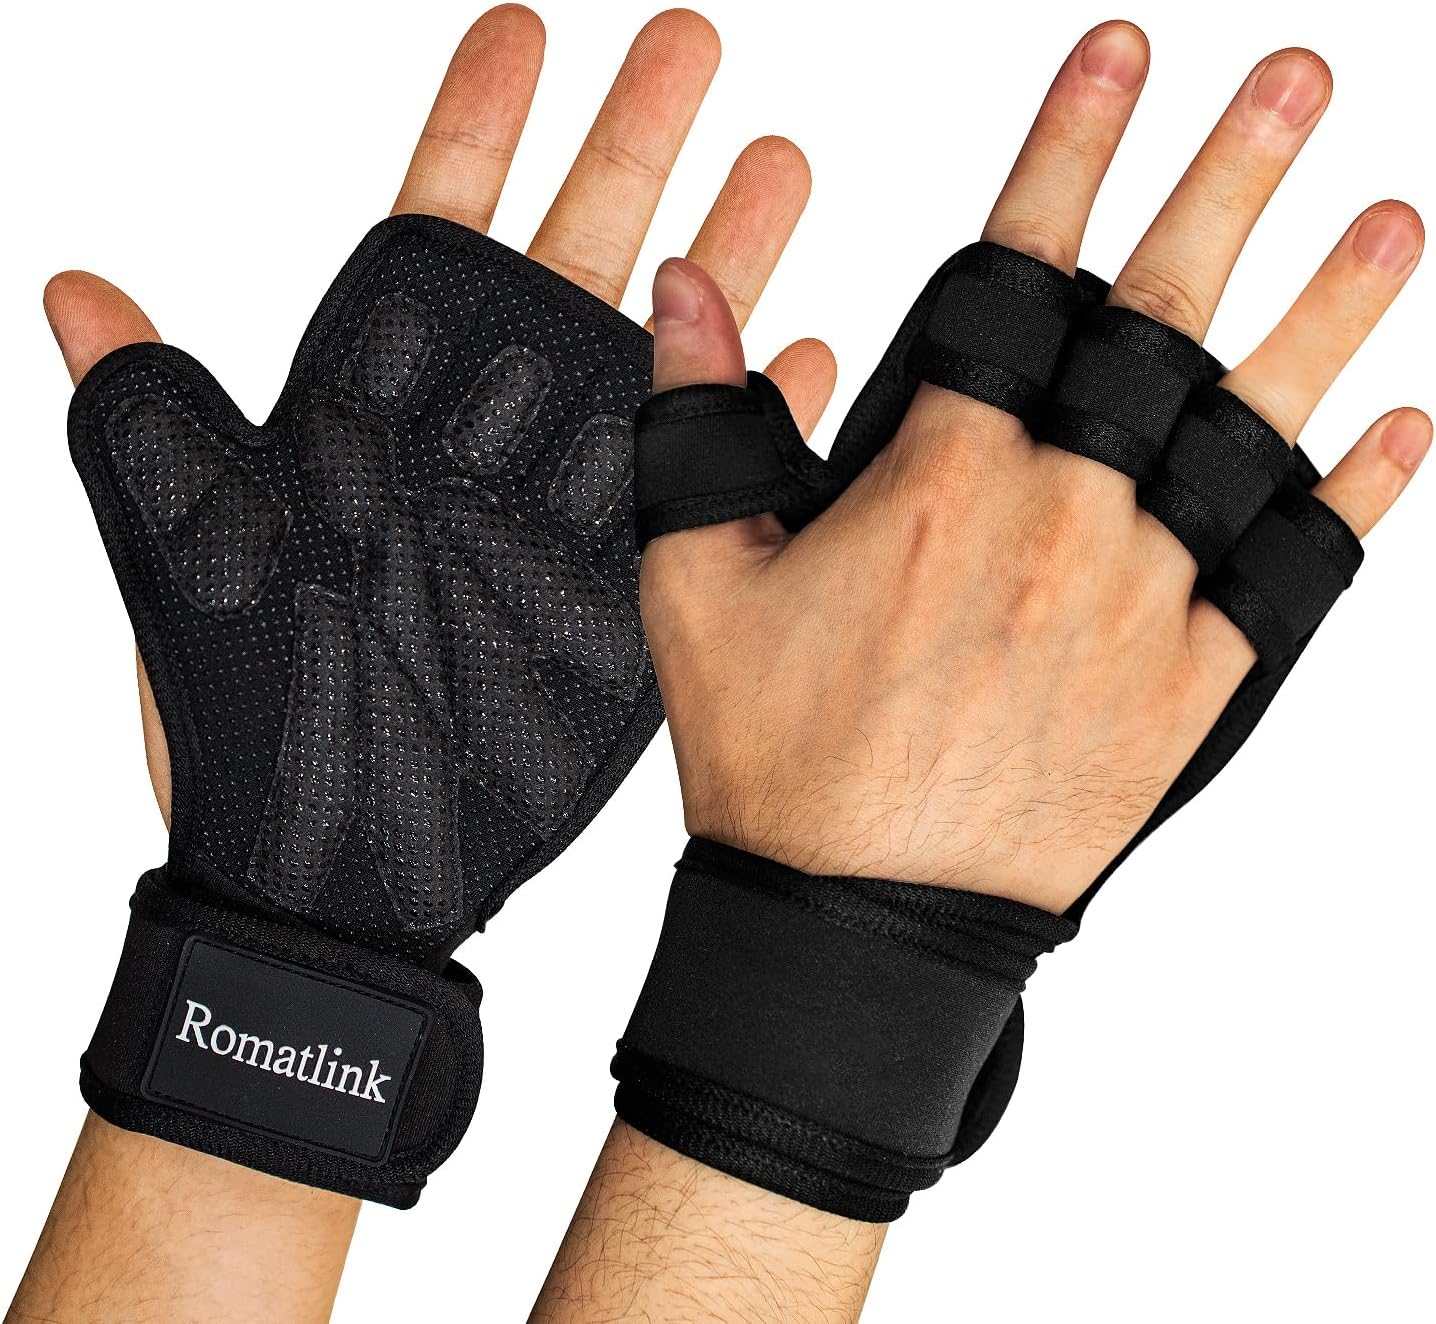 YOUNGDO Workout Gloves for Athletic Use Weight Lifting, Palm Protectors with Adjustable Wrist Wraps, Sport Gloves